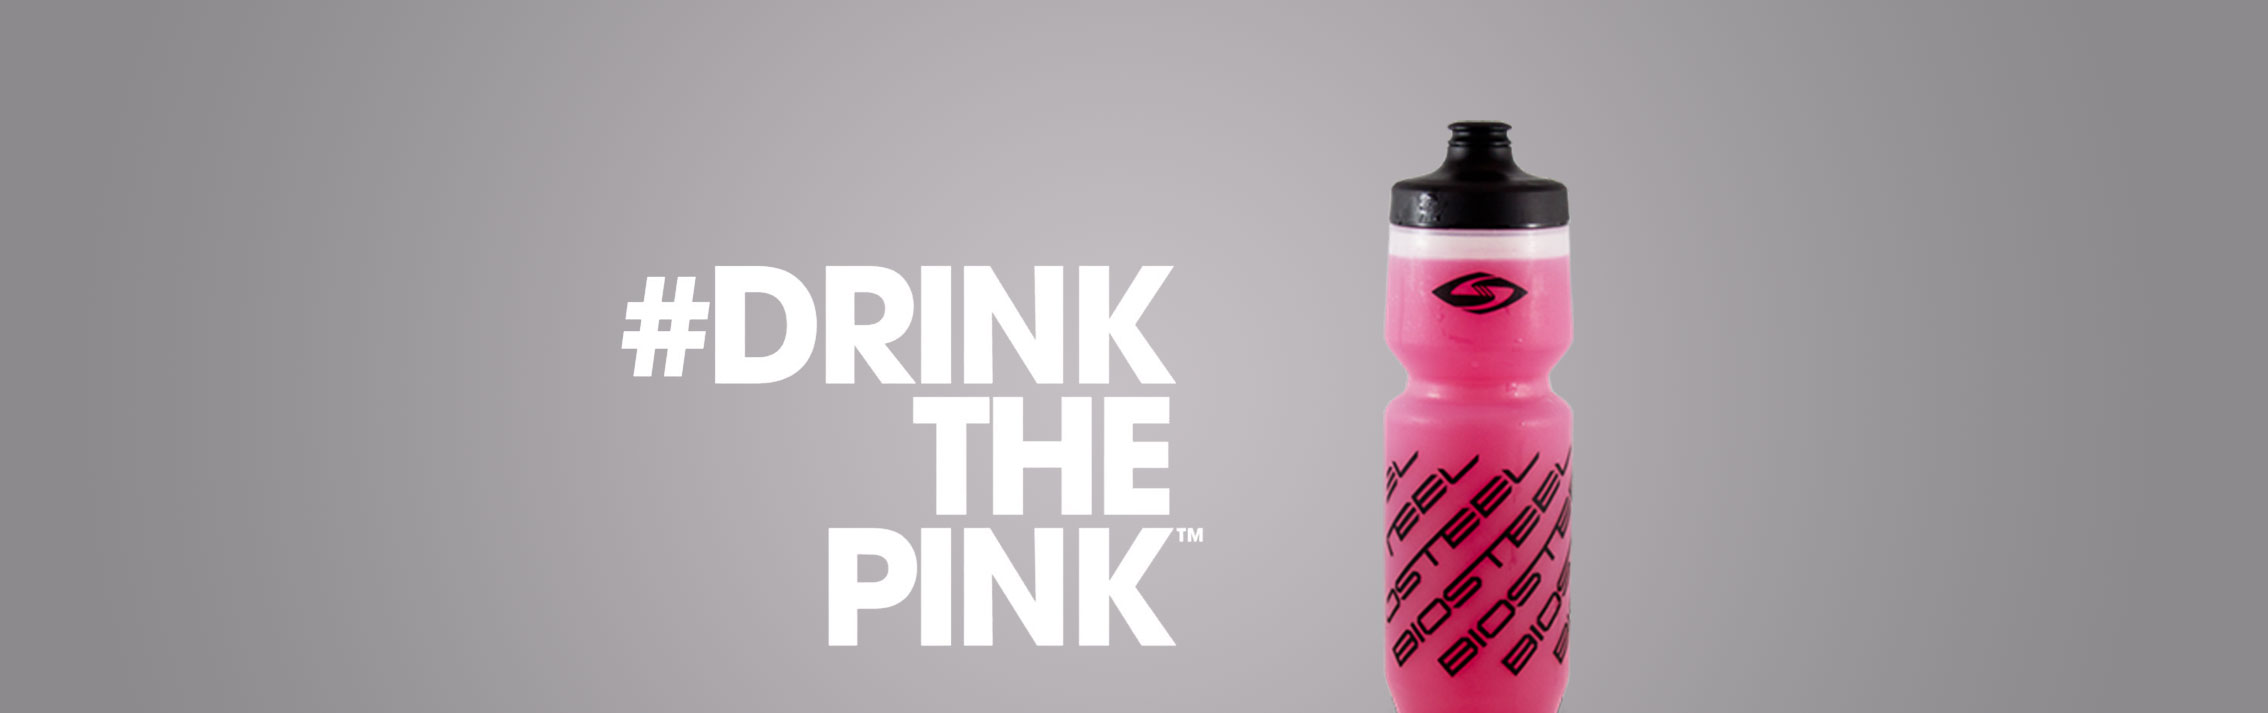 Drink-the-pink-goaliepro